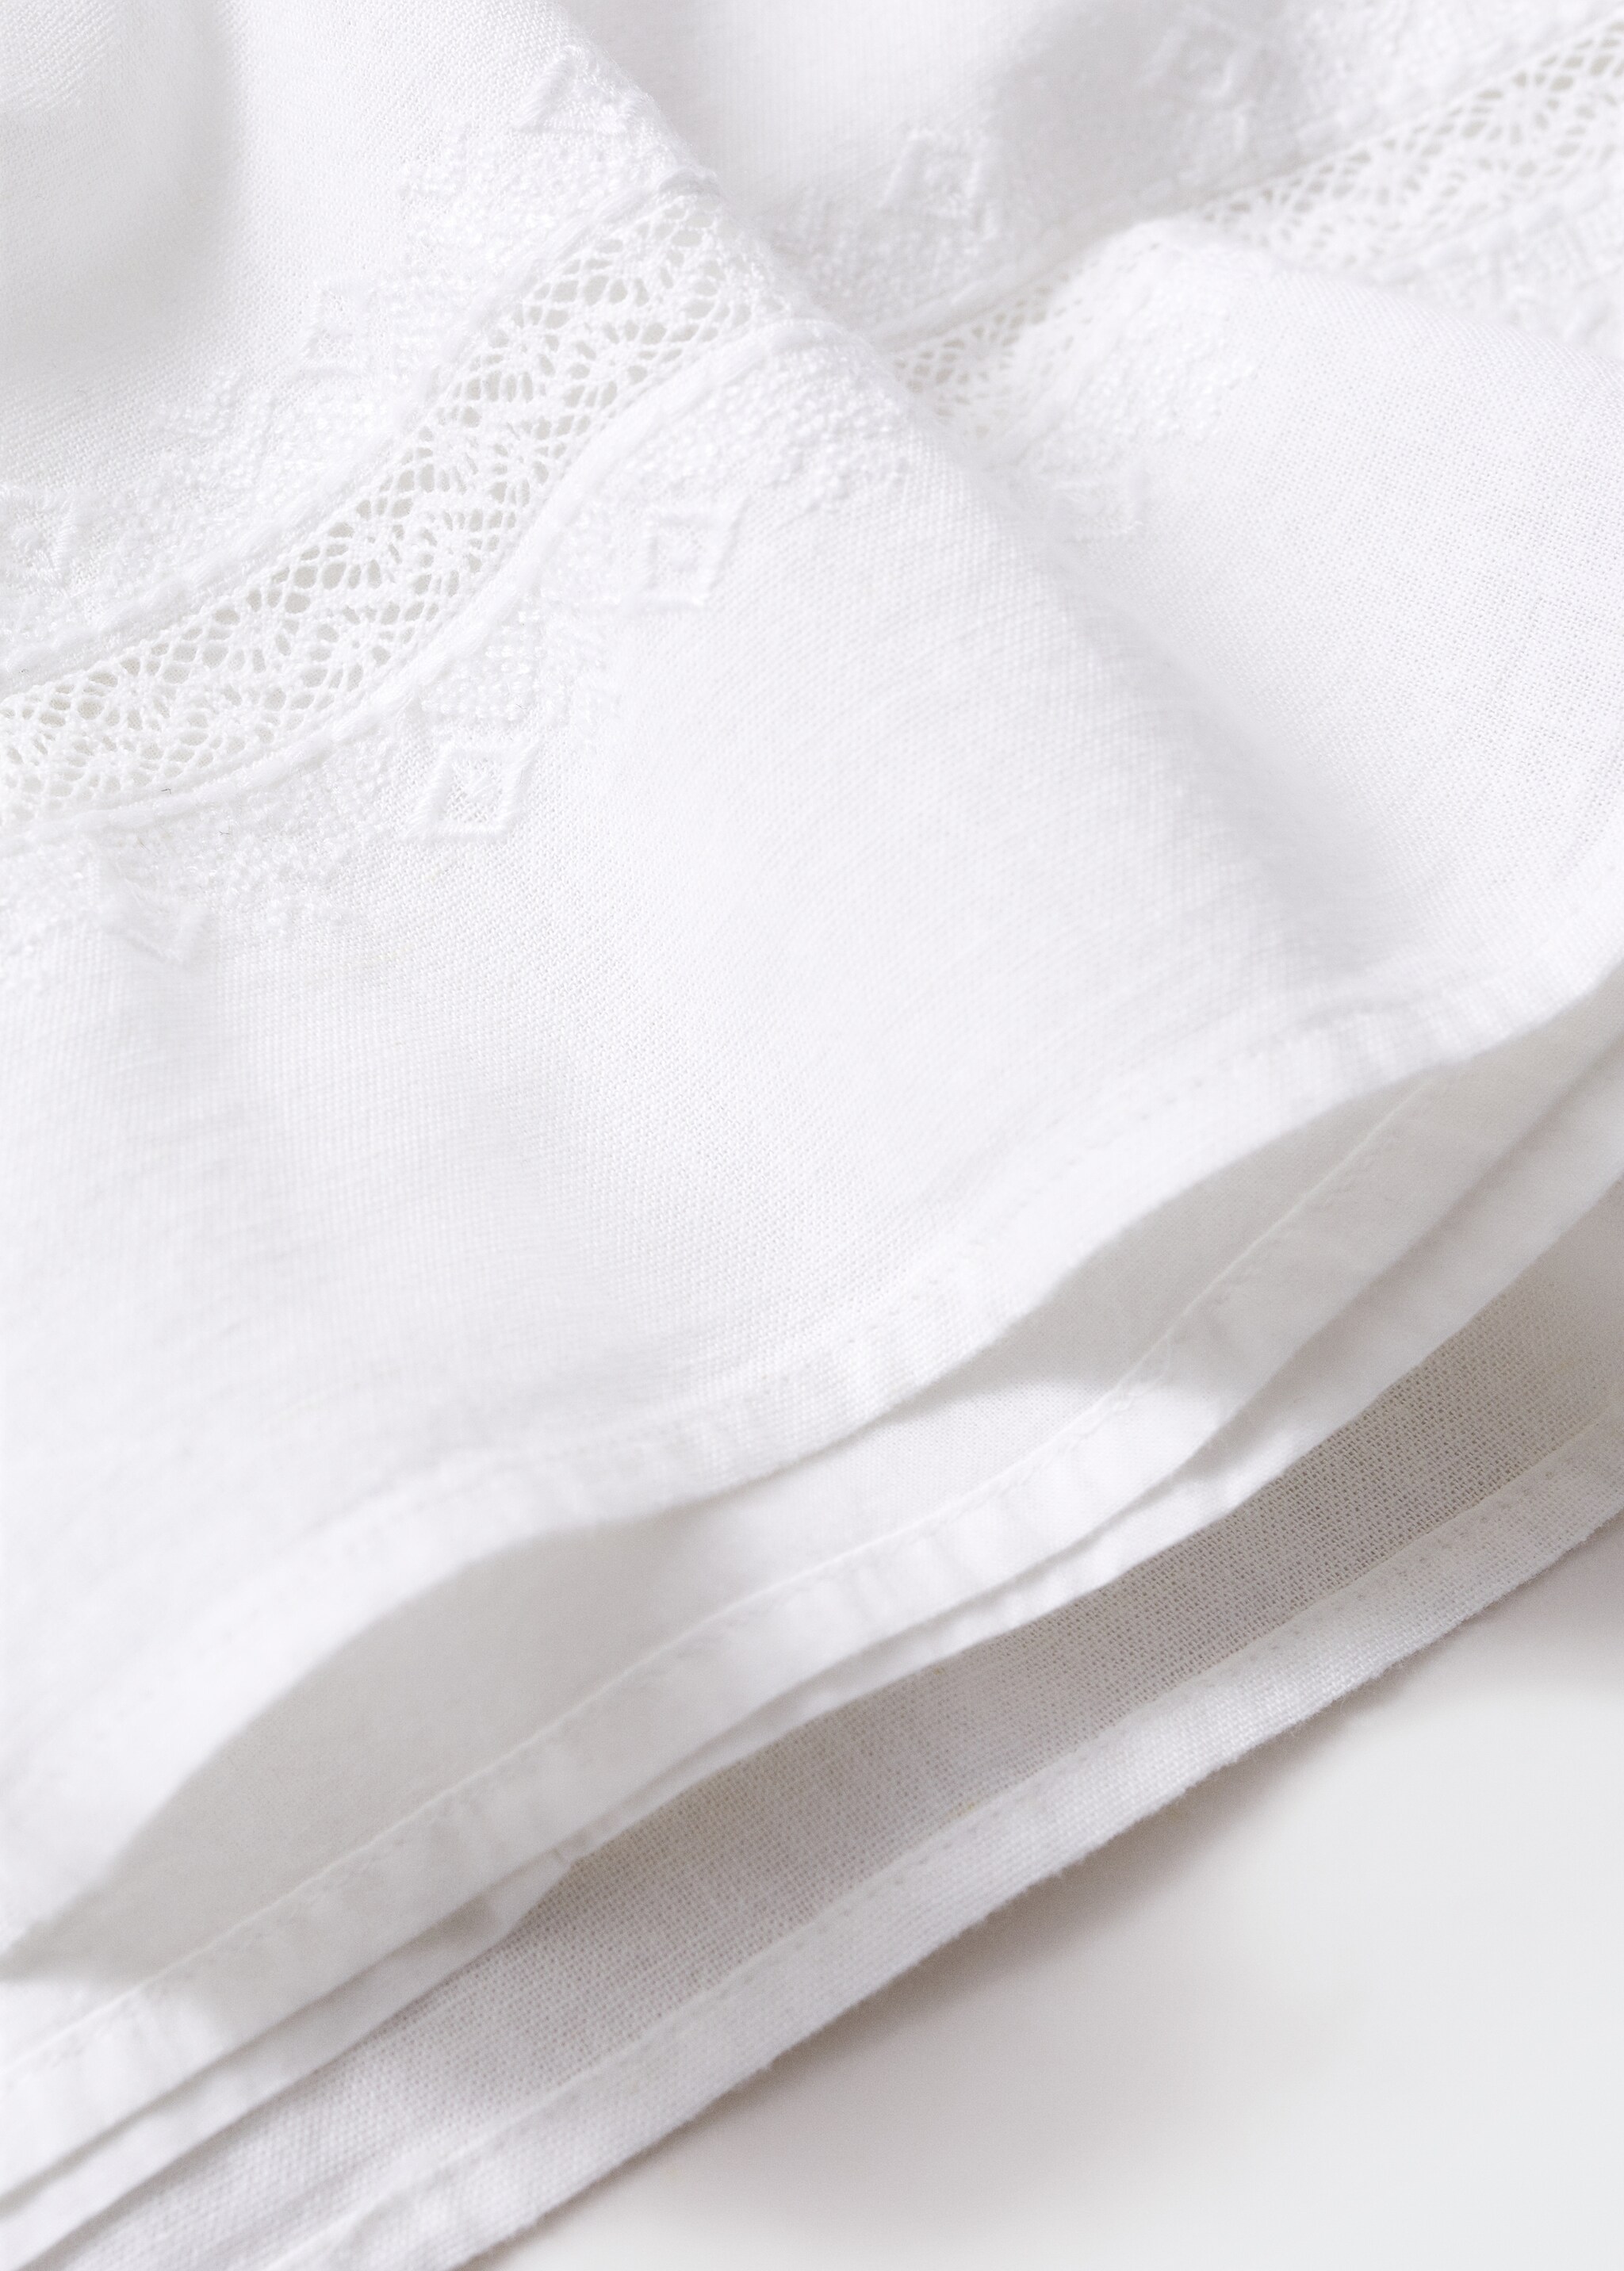 Linen dress and nappy cover - Details of the article 0